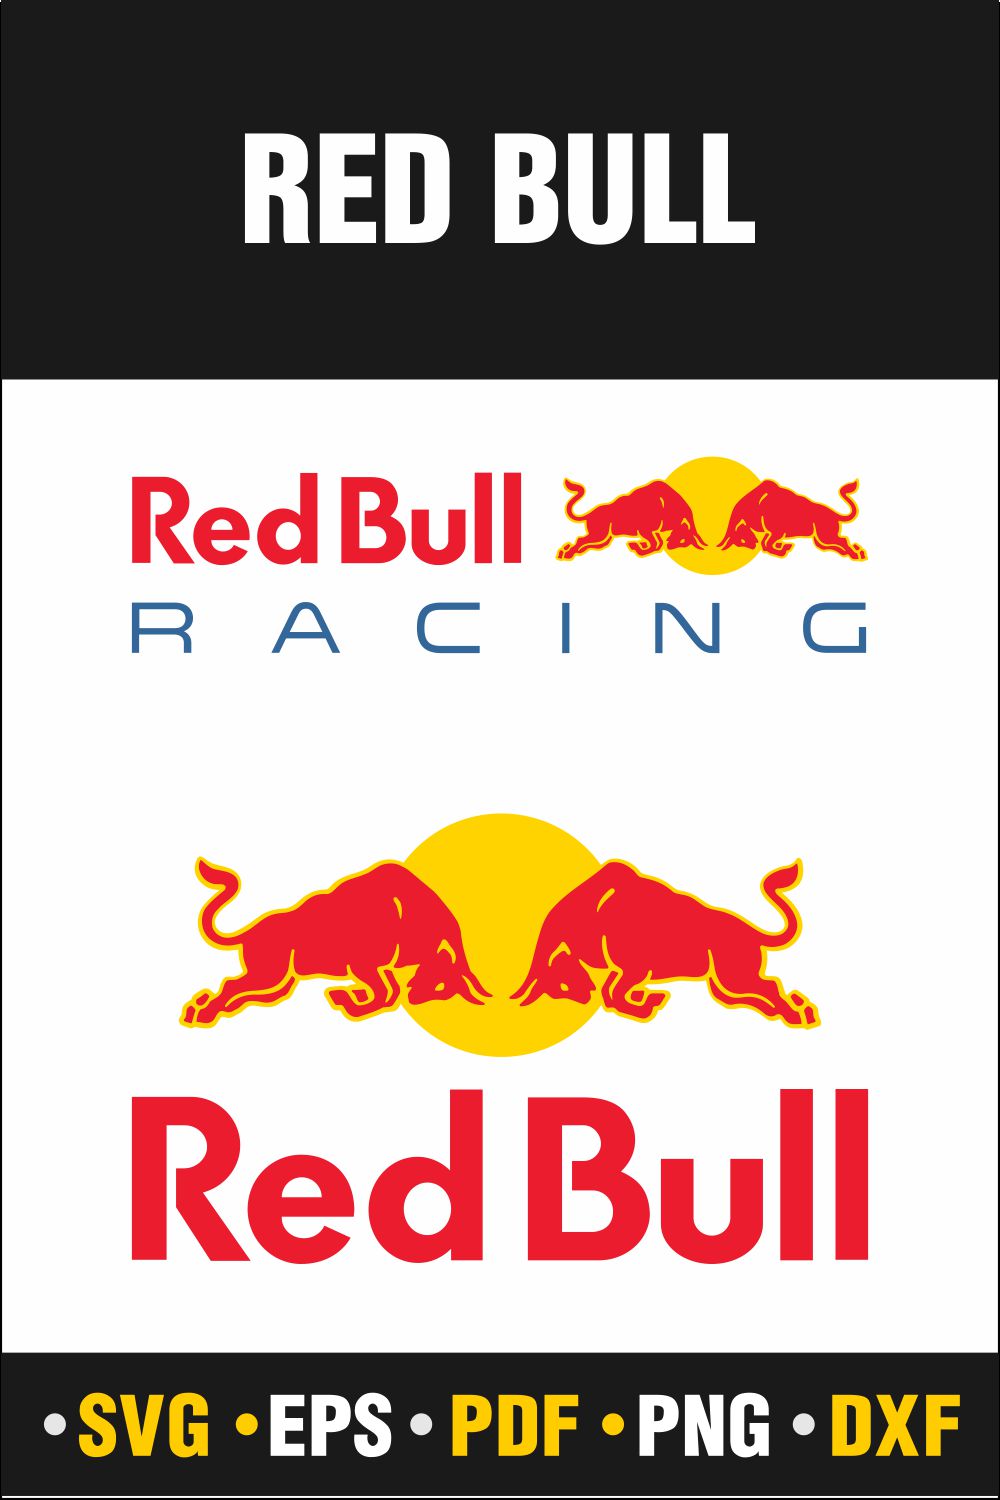 Redbull, Redbull Svg, Redbull Monogram Svg, Redbull Png, Bull Png, Red Bulls Svg, Instant Download Vector Cut file Cricut, Silhouette, Pdf Png, Dxf, Decal pinterest preview image.